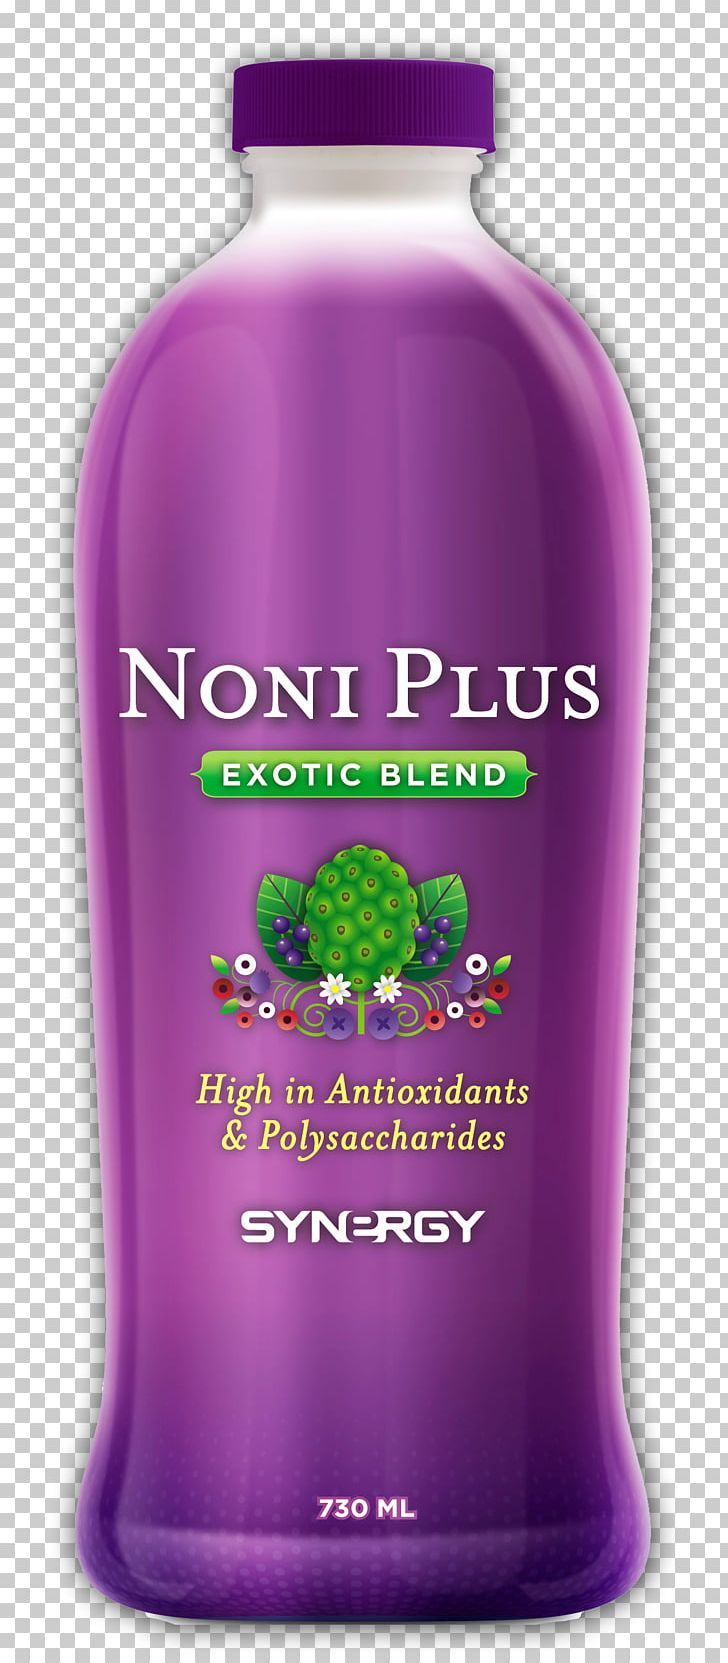 Chlorophyll Health Synergy Poison Detoxification PNG, Clipart, Body, Bottle, Chlorophyll, Detoxification, Disease Free PNG Download